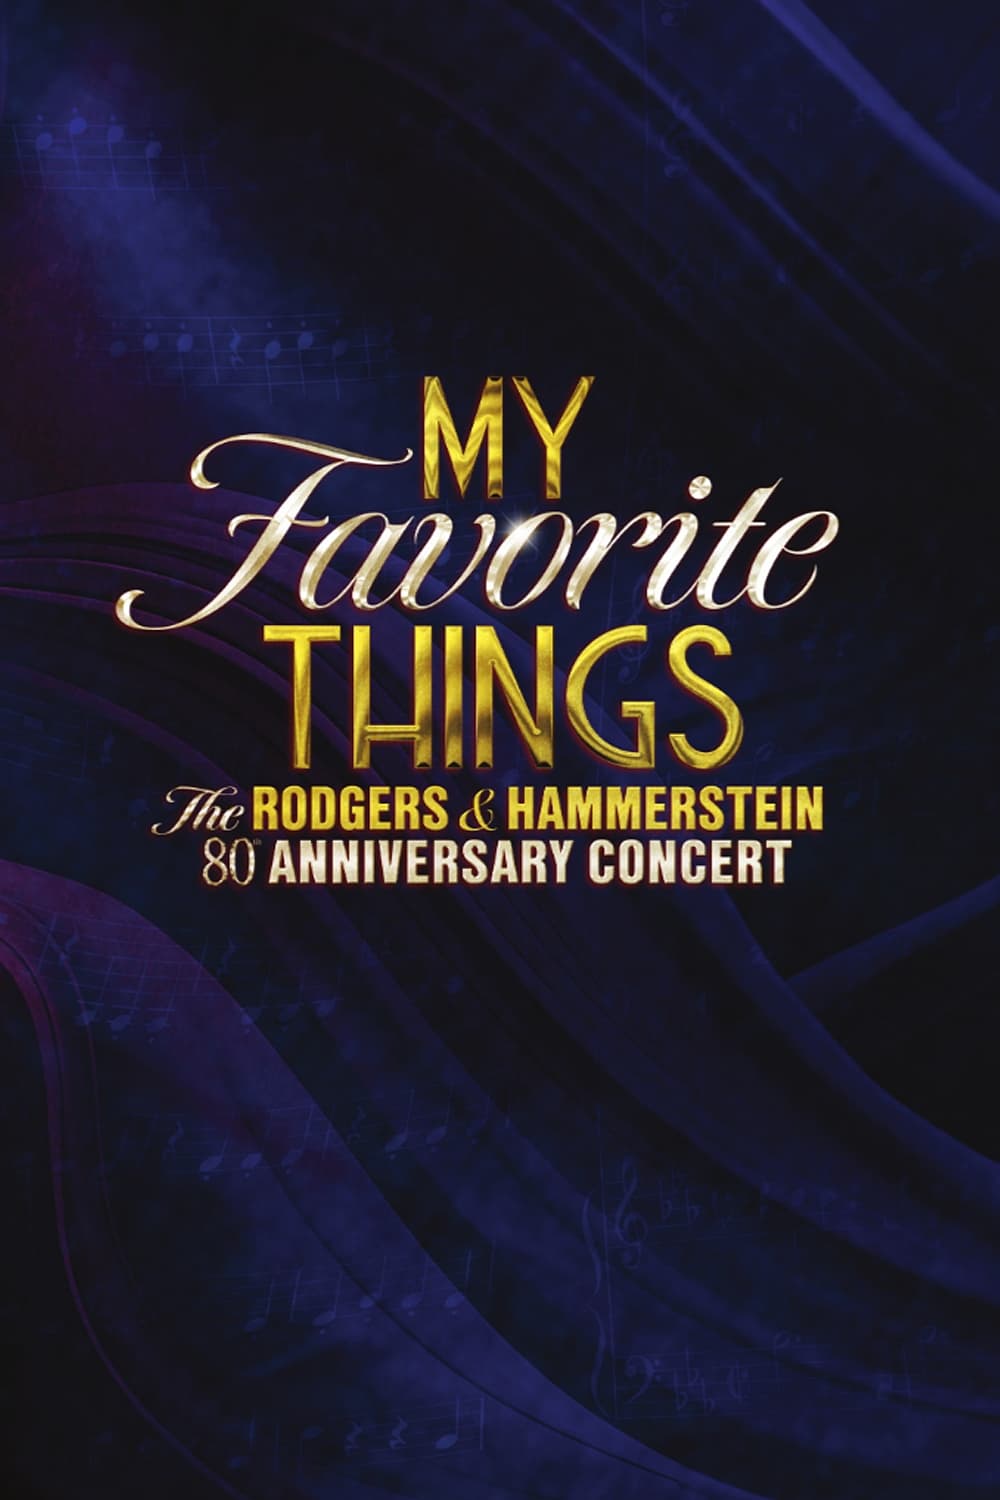 My Favorite Things: The Rodgers & Hammerstein 80th Anniversary Concert film